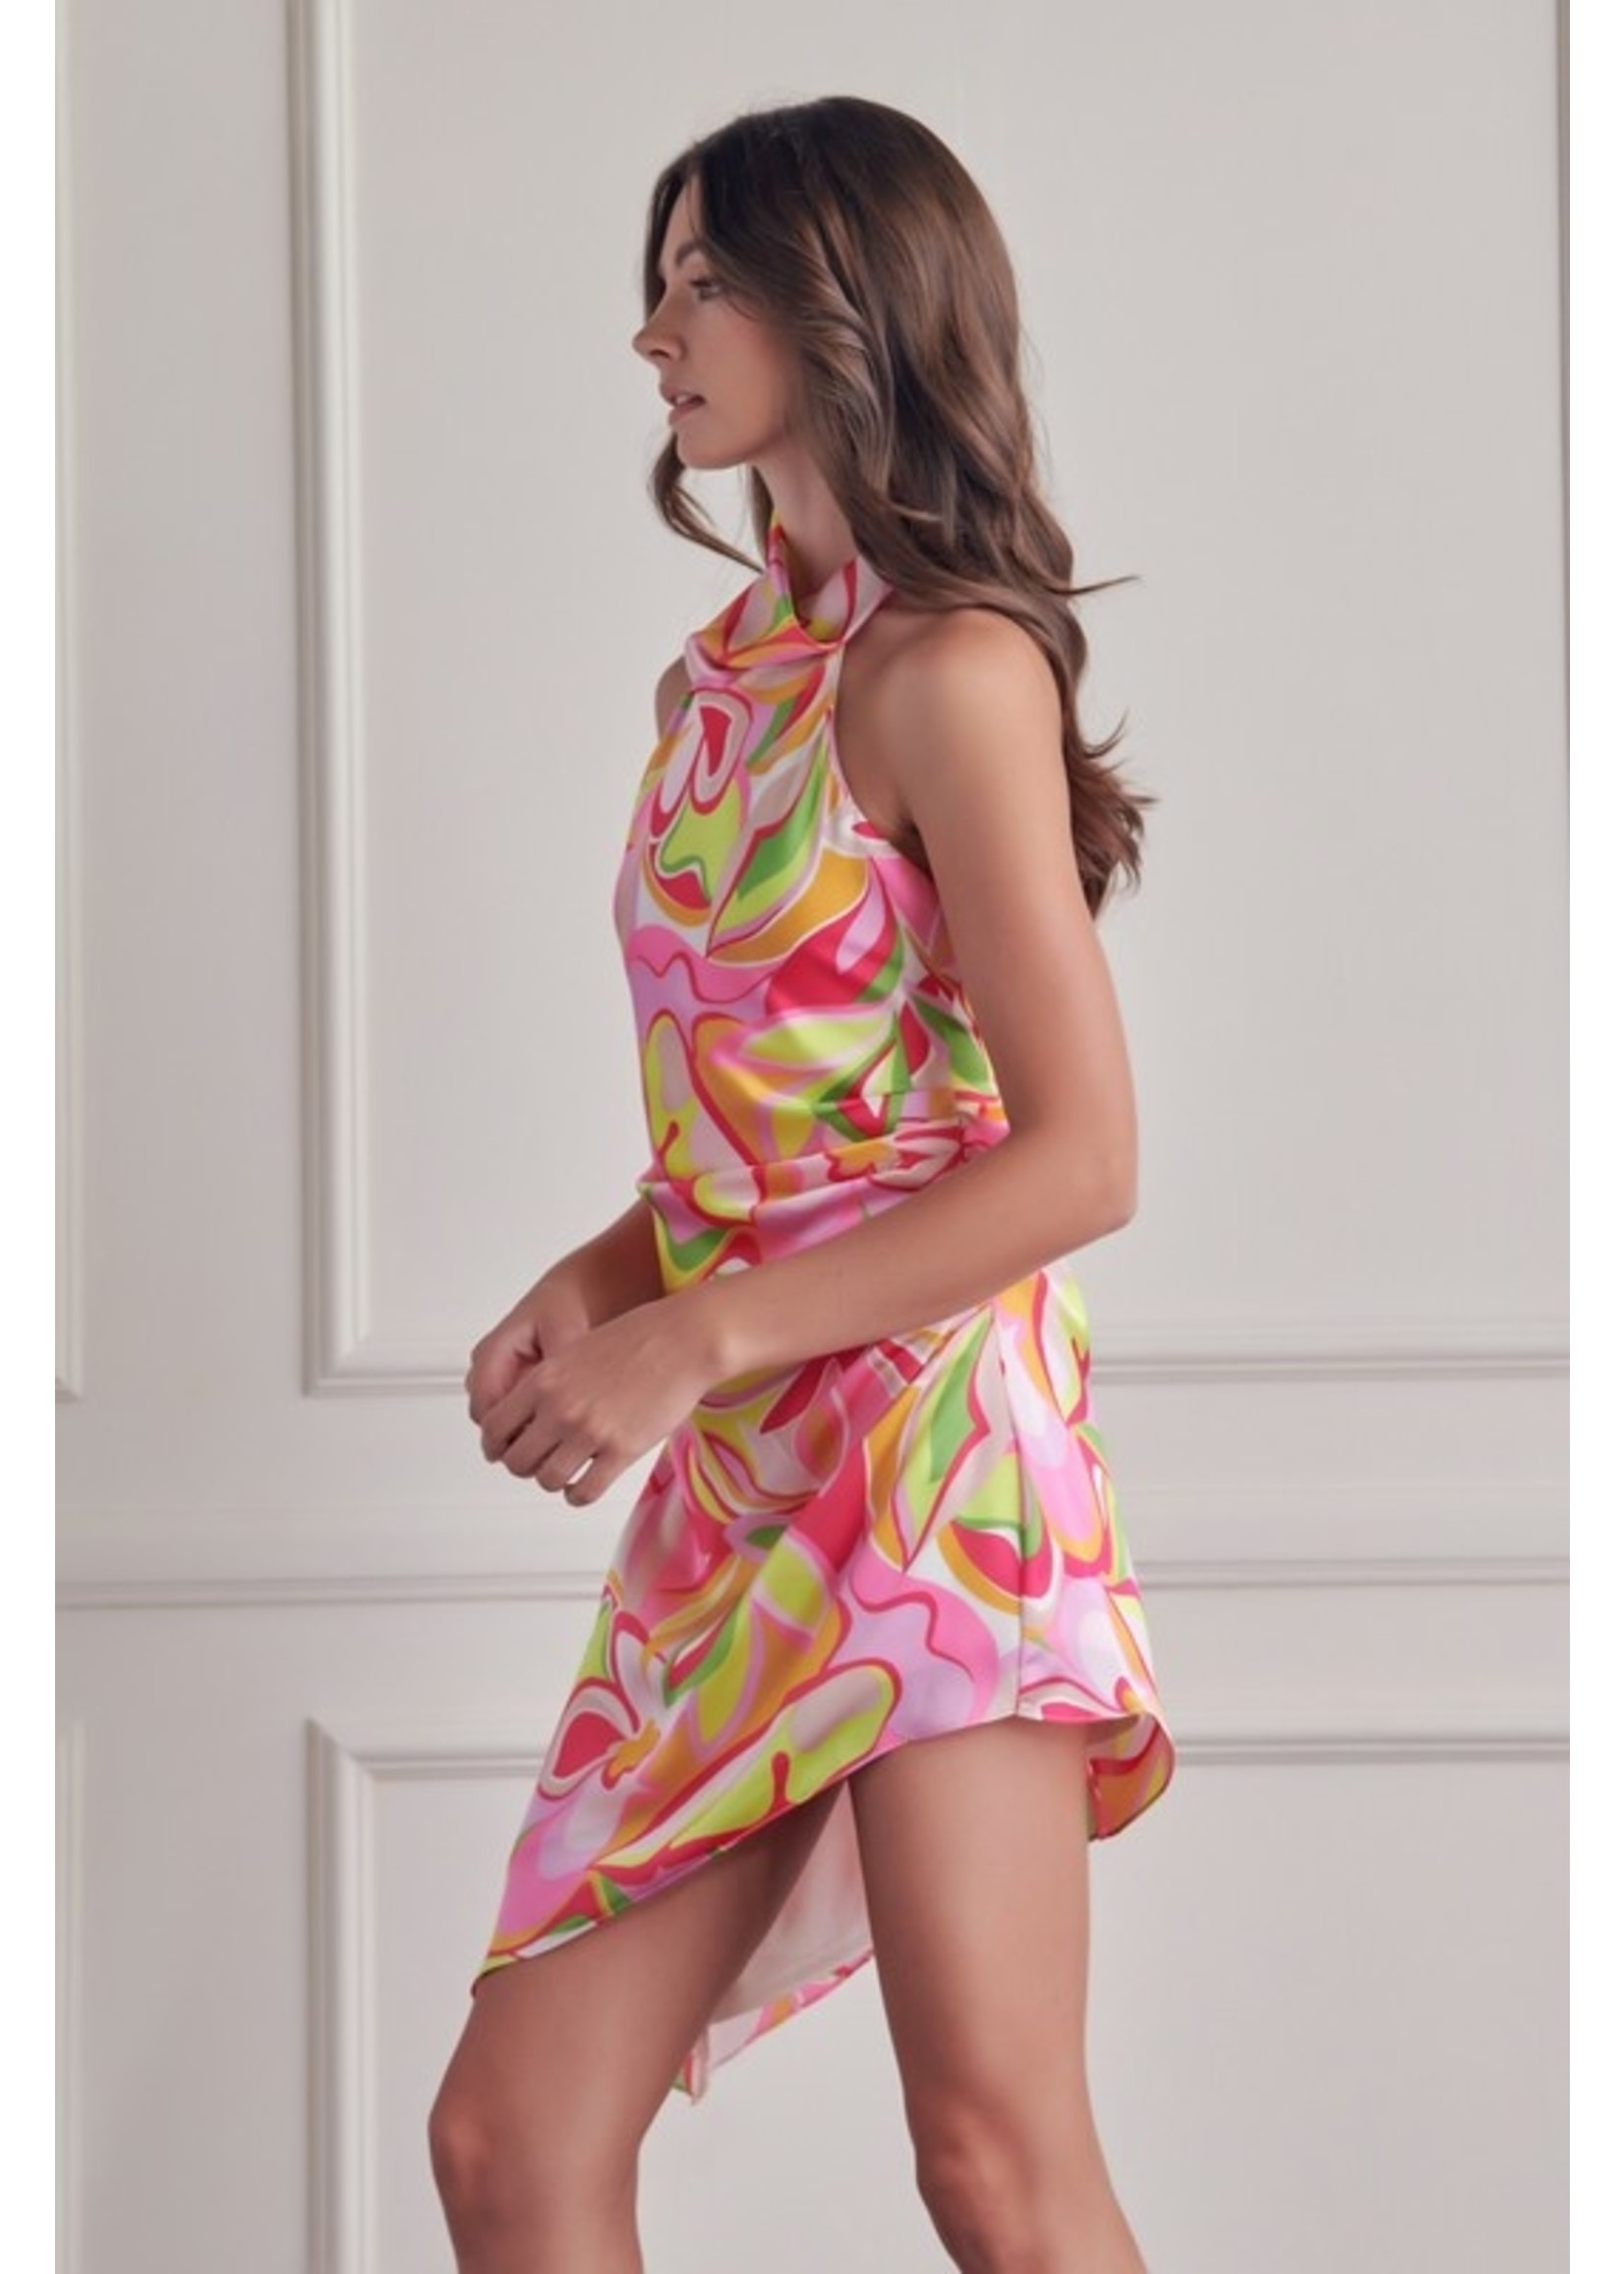 DO + BE Multi Color Front Tie Dress - GY1933OJB